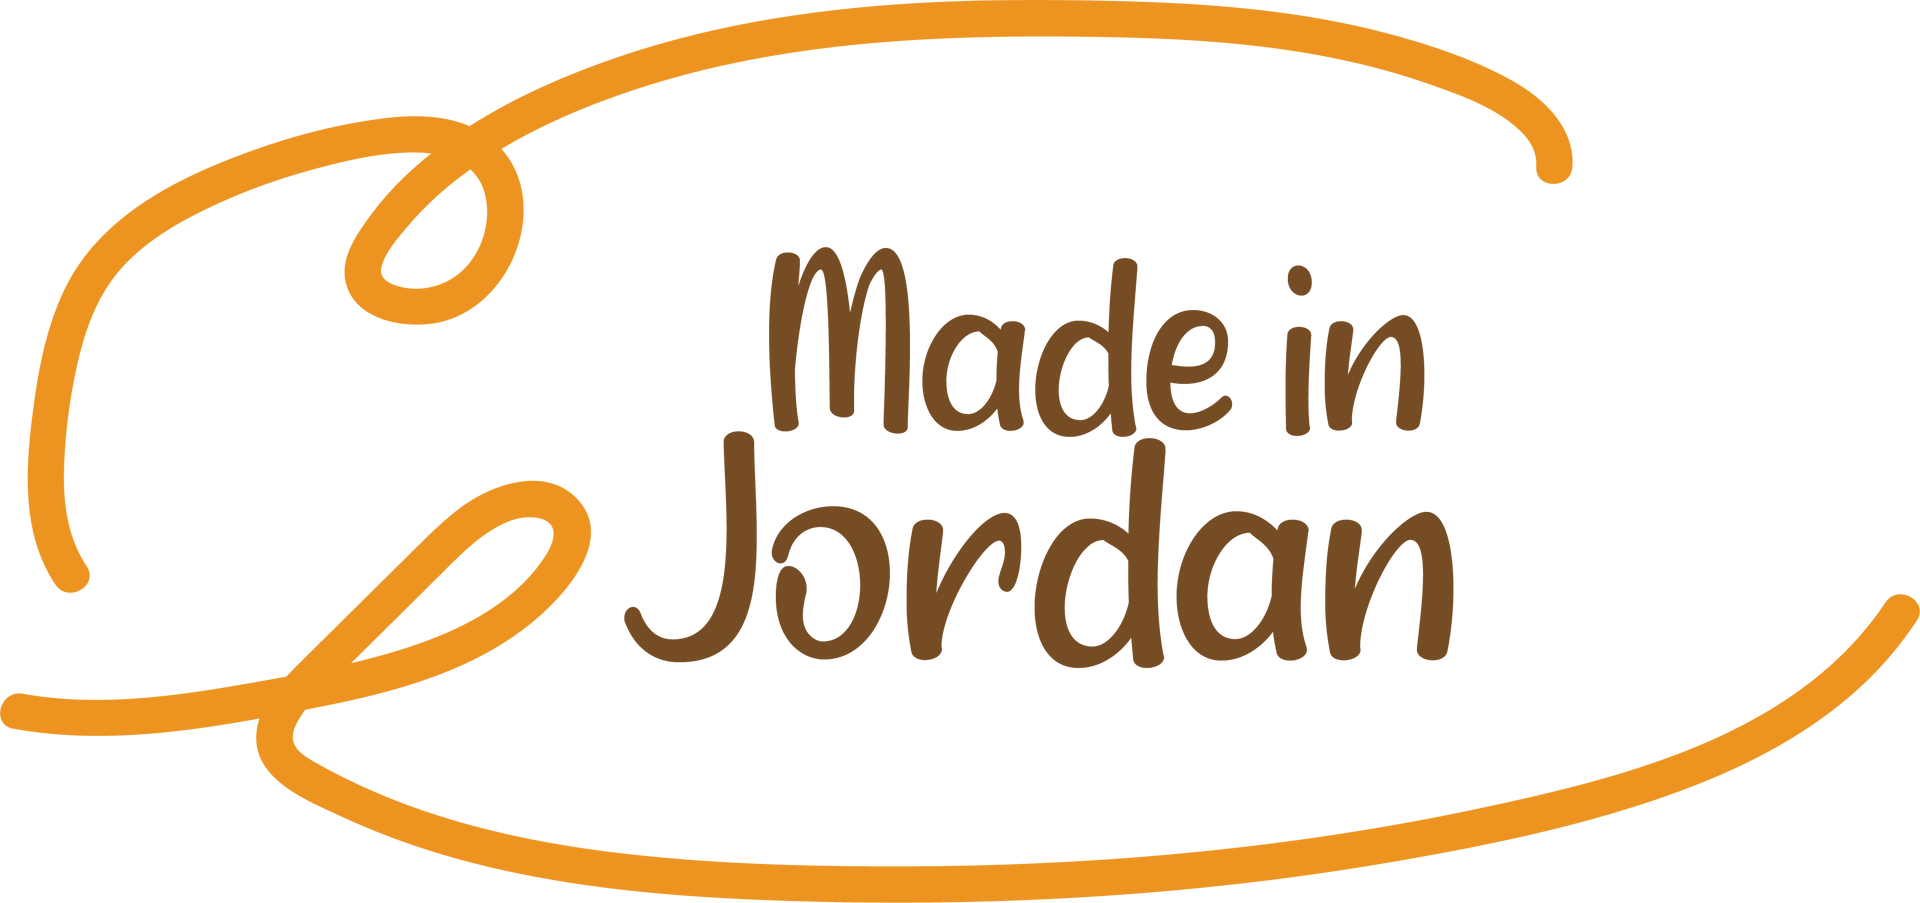 A logo that says made in jordan on a white background.